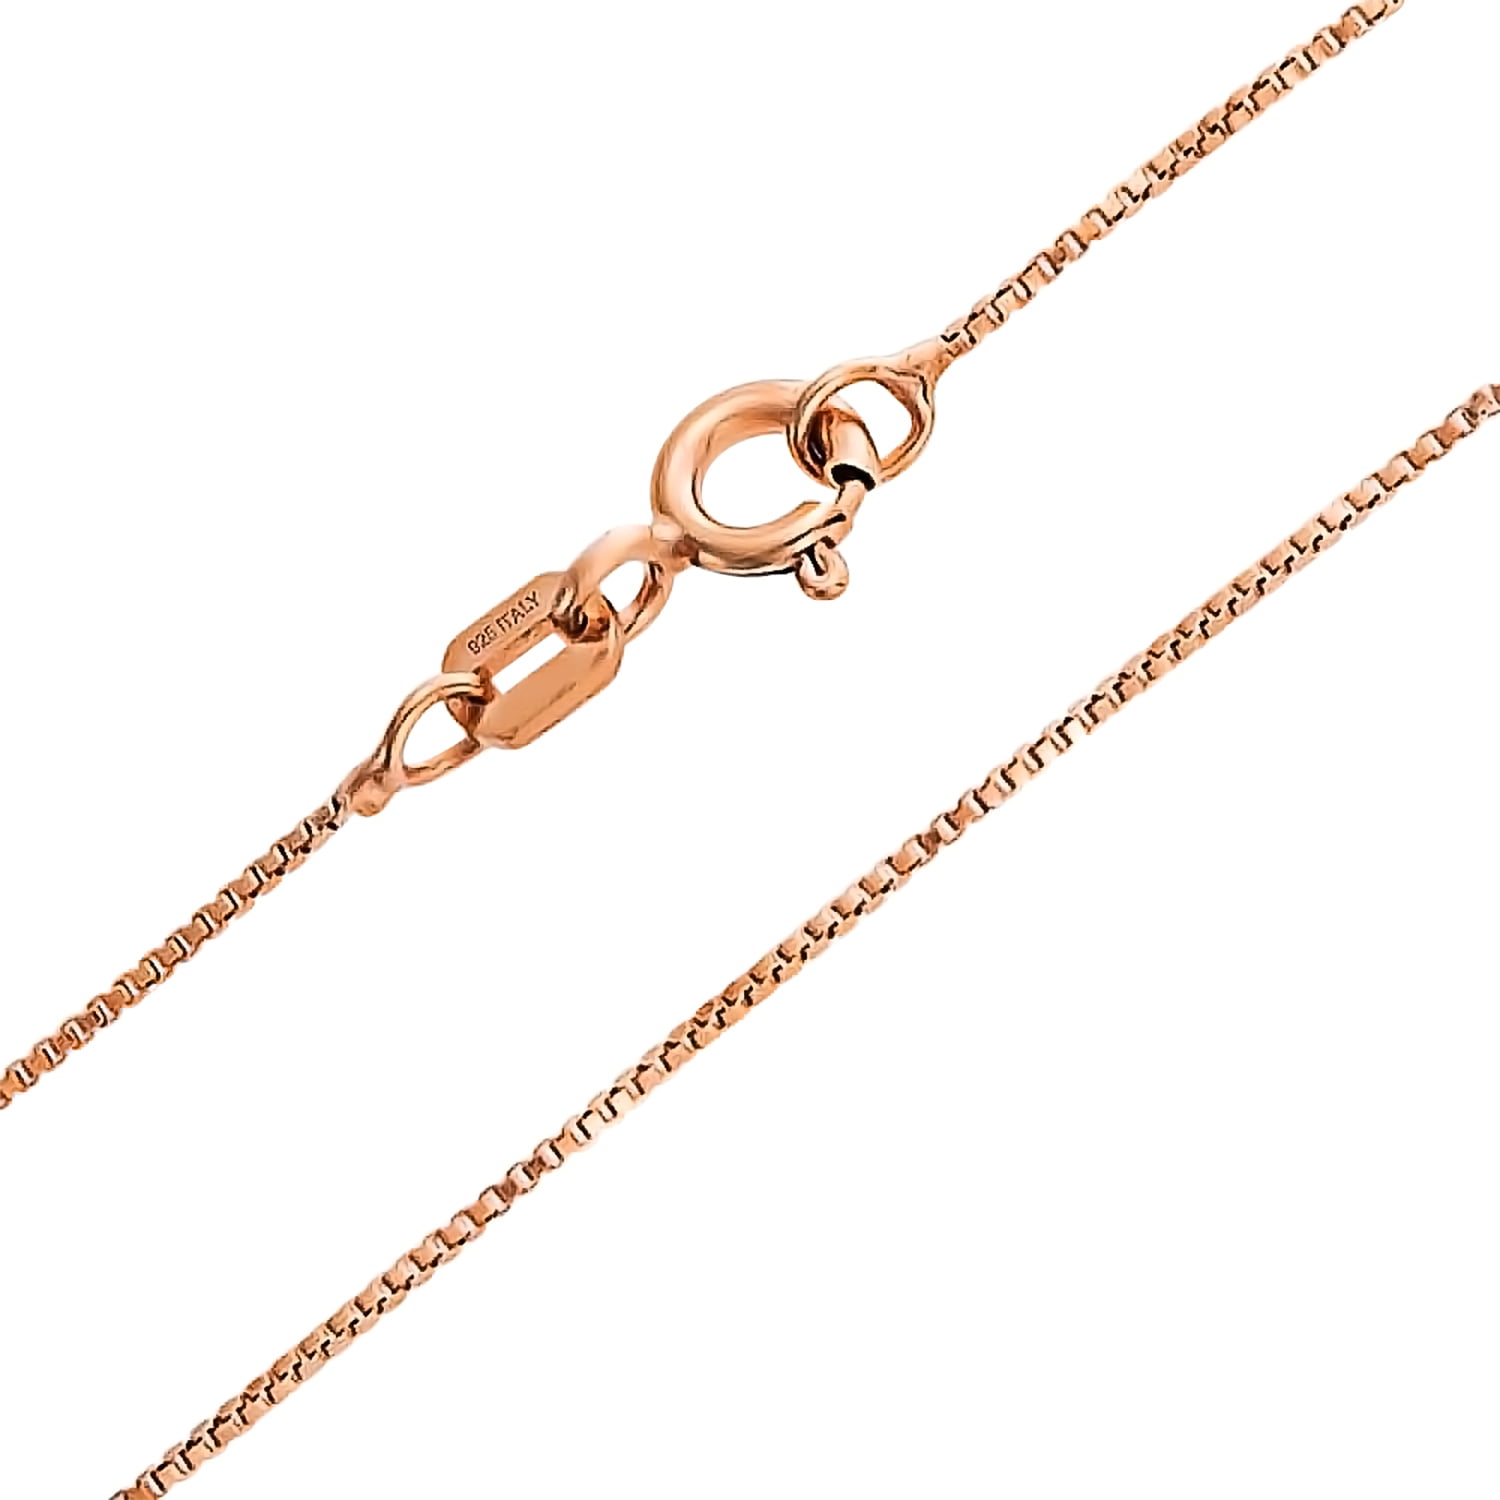 Bling For Your Buck 18K Gold Flashed Over Sterling Silver 1mm Thin Italian Box Chain Necklace 14-30